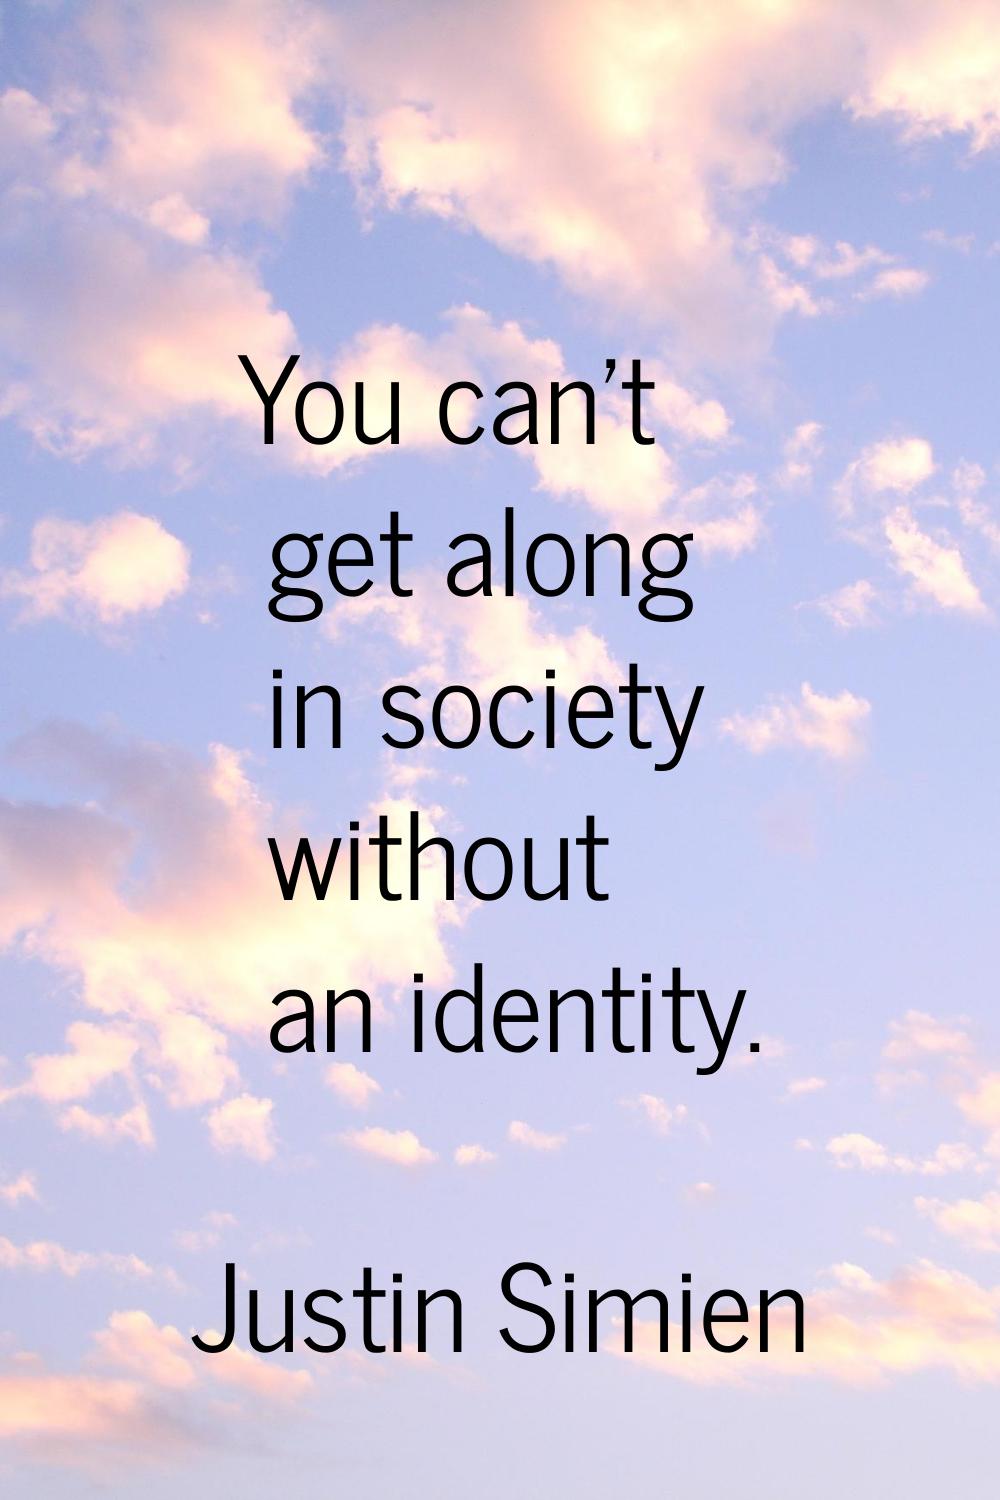 You can't get along in society without an identity.